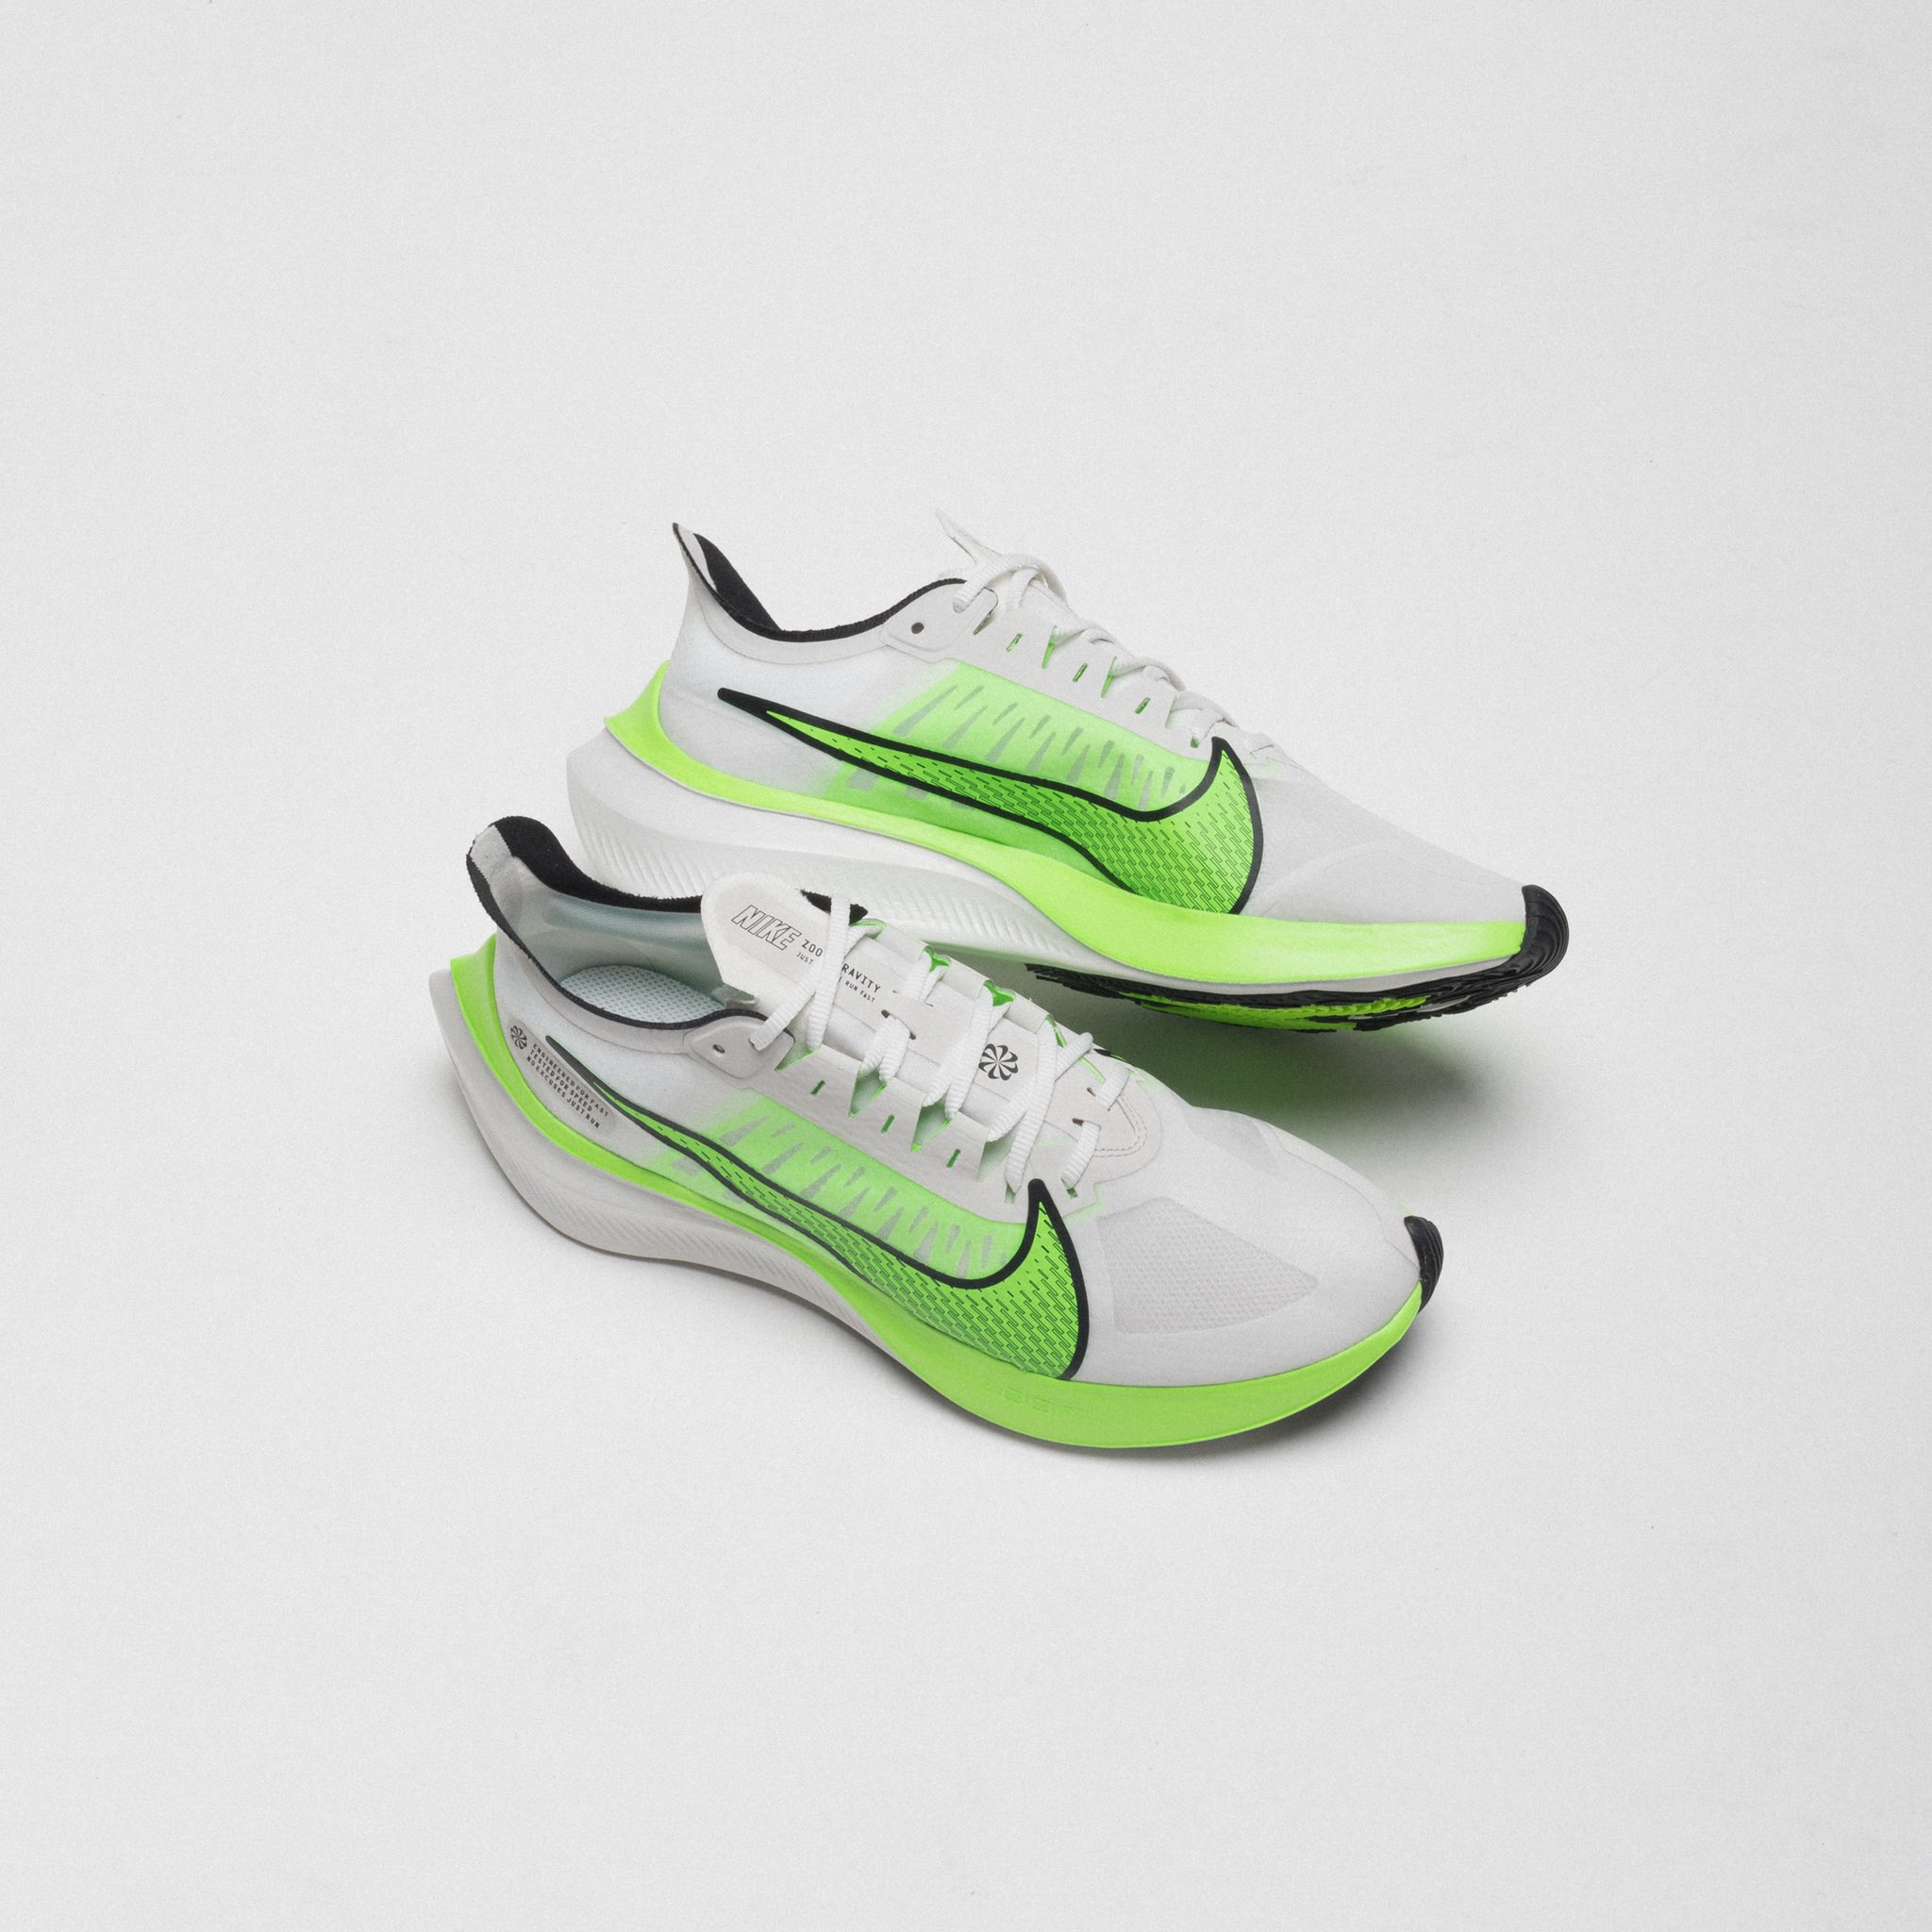 UNDEFEATED on Twitter: "Nike Zoom Gravity // now at Undefeated La Brea and https://t.co/rPhV7ZP2Fc https://t.co/Lrt2R9JBQF" / Twitter